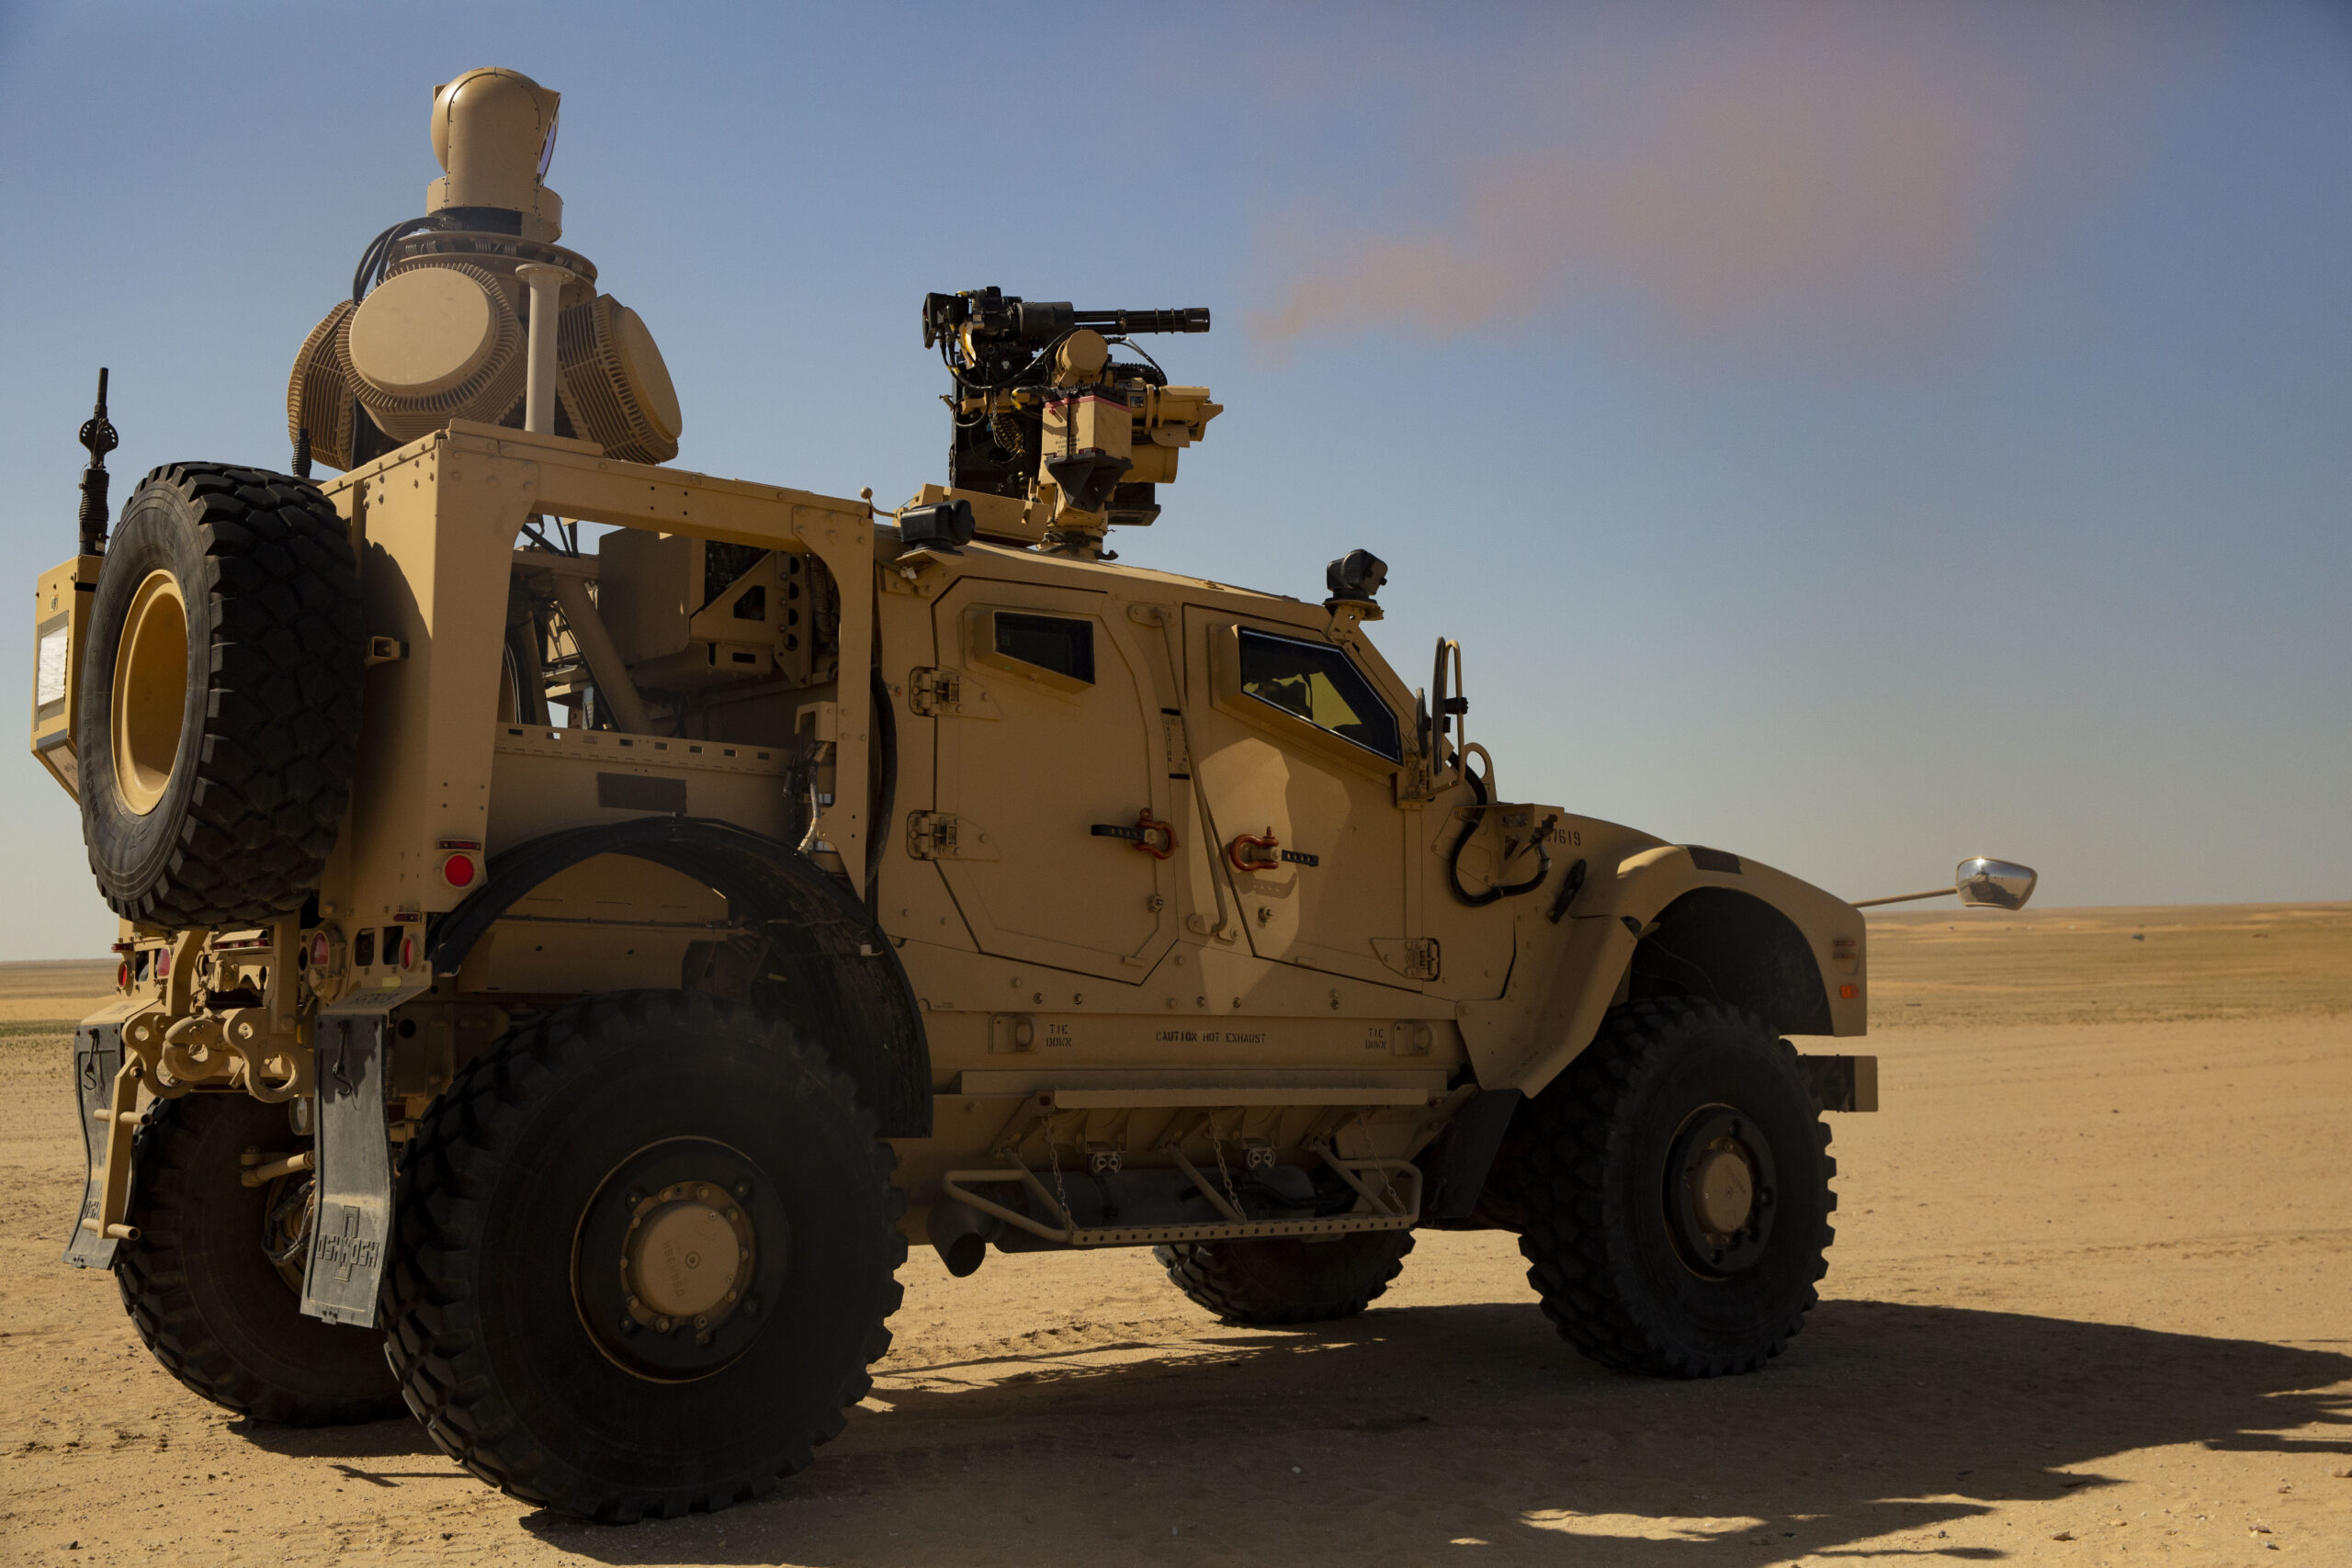 U.S. Marines with 2nd Low Altitude Air Defense Battalion Counter-Unmanned Aerial Systems Detachment, attached to Special Purpose Marine Air-Ground Task Force Crisis Response-Central Command, fire the Marine Air Defense Integrated System Mine Resistant Ambush Protected Vehicle during a live-fire range in southwest Asia Feb. 18, 2019. The MADIS is the first vehicle to utilize kinetic and non-kinetic measures to disable Counter-Unmanned Aerial Systems. SPMAGTF-CR-CC is specifically designed to be capable of deploying aviation, ground, and logistics forces forward at a moment’s notice. (U.S. Marine Corps photo by Lance Cpl. Jack C. Howell)